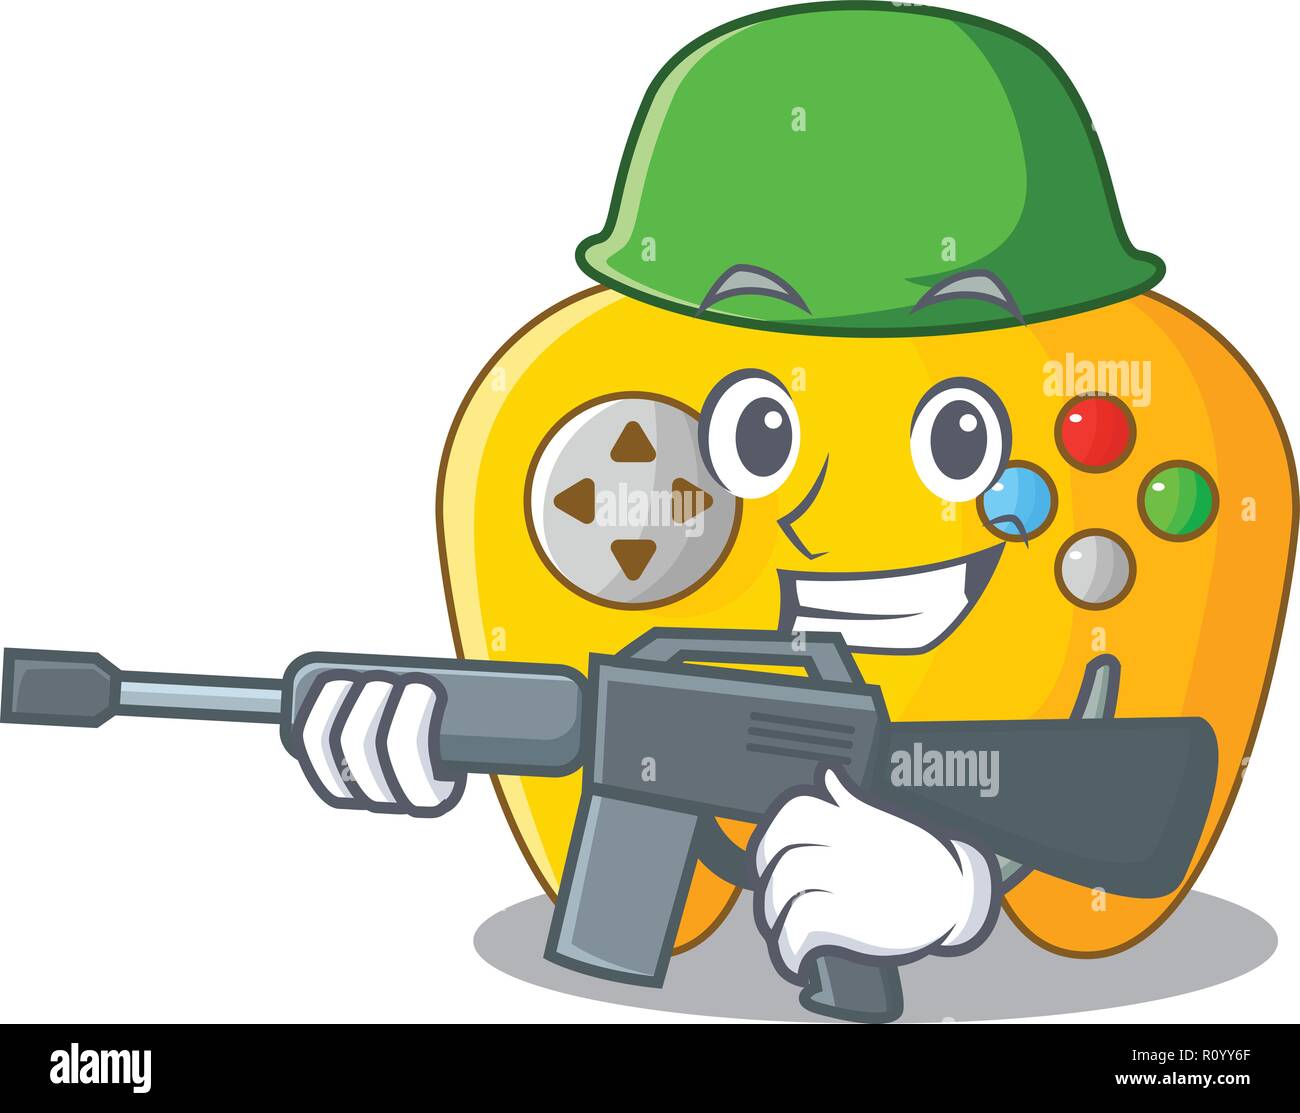 Army modern game shaped controller cartoon wood Stock Vector